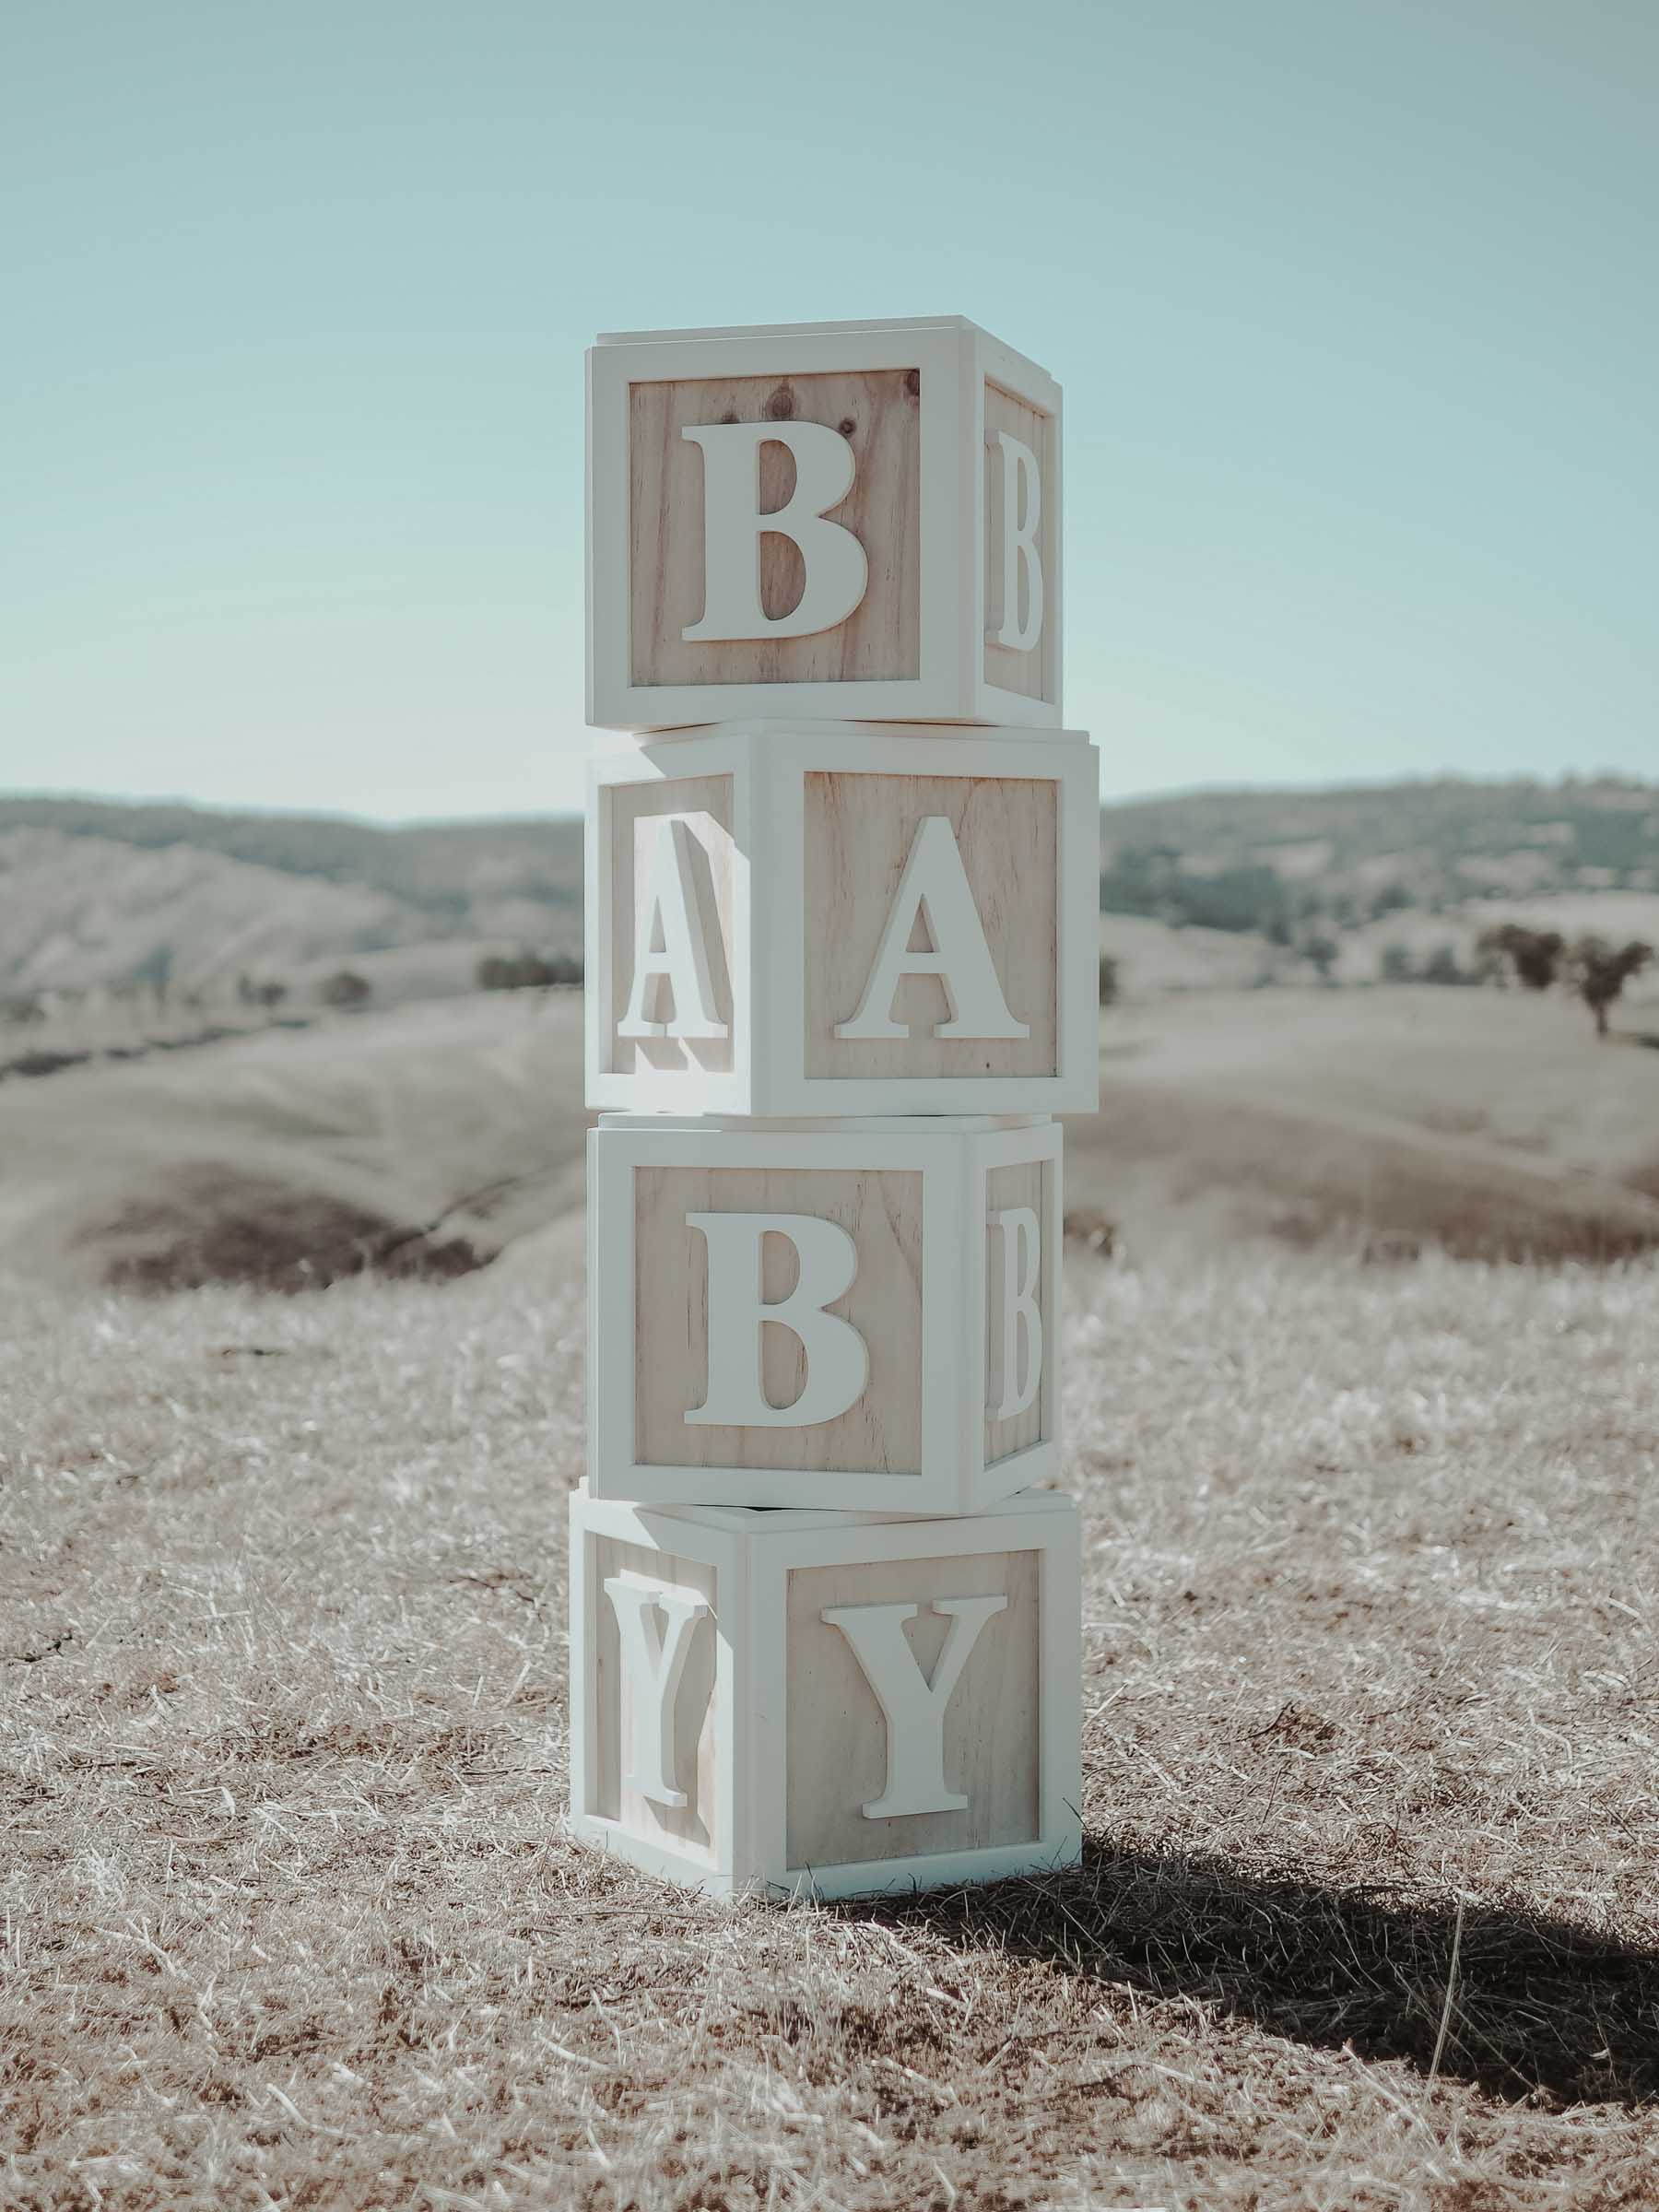 White and wood baby blocks for hire for a baby shower or baby's birthday